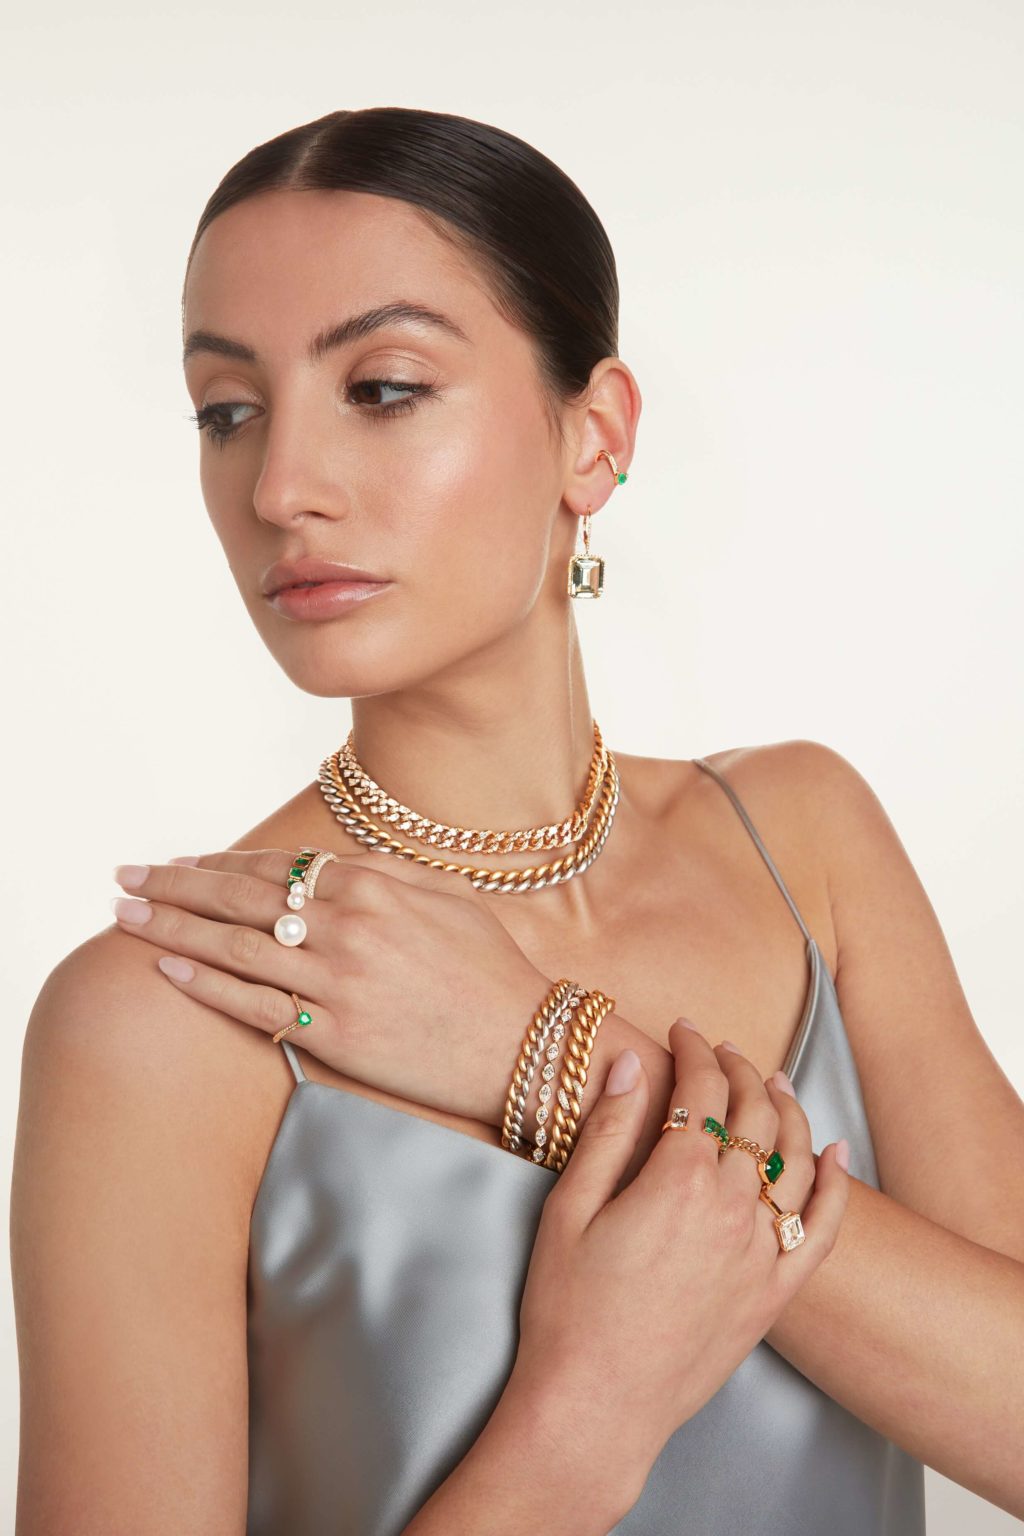 A model girl touching her shoulder with her hand having visible rings , bracelet and necklace